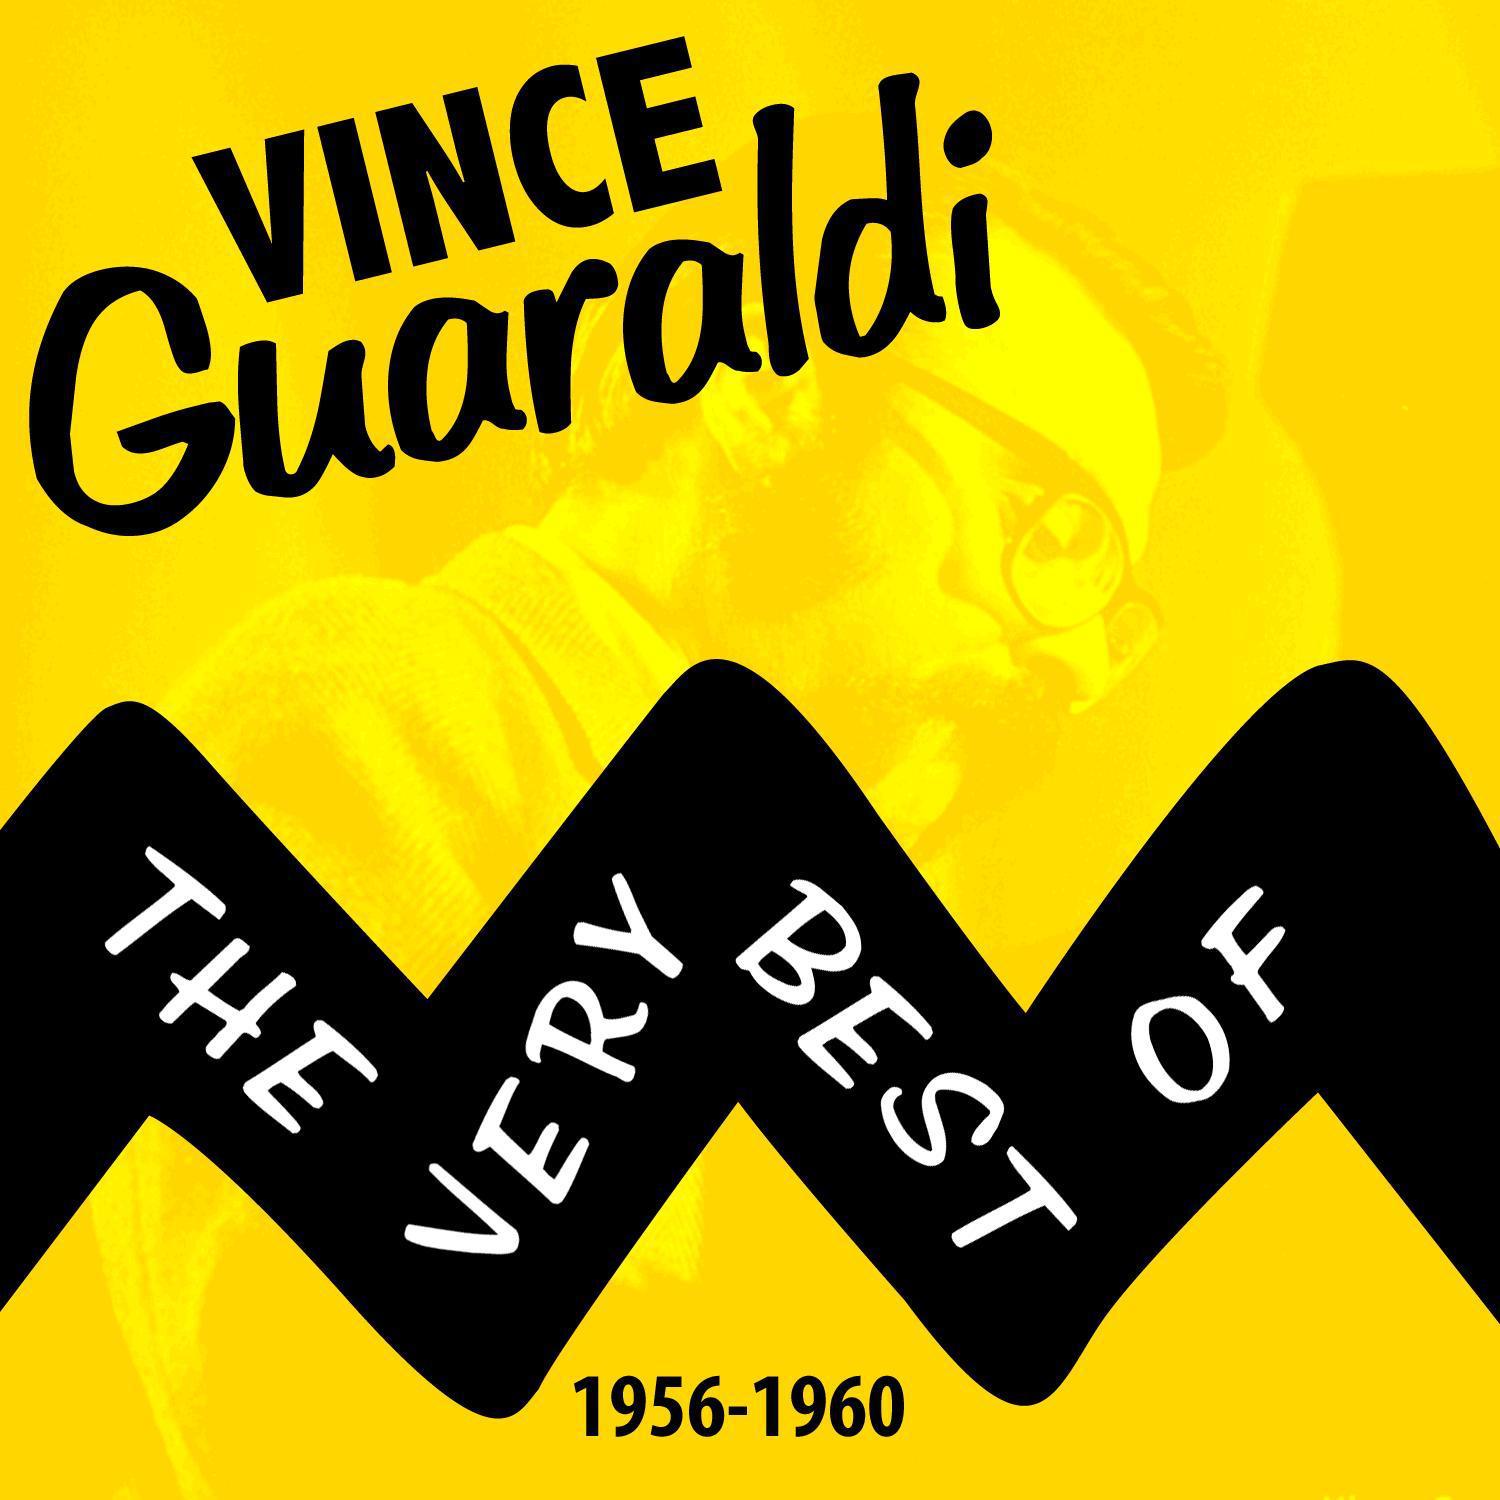 The Very Best of Vince Guaraldi (1956-1960)